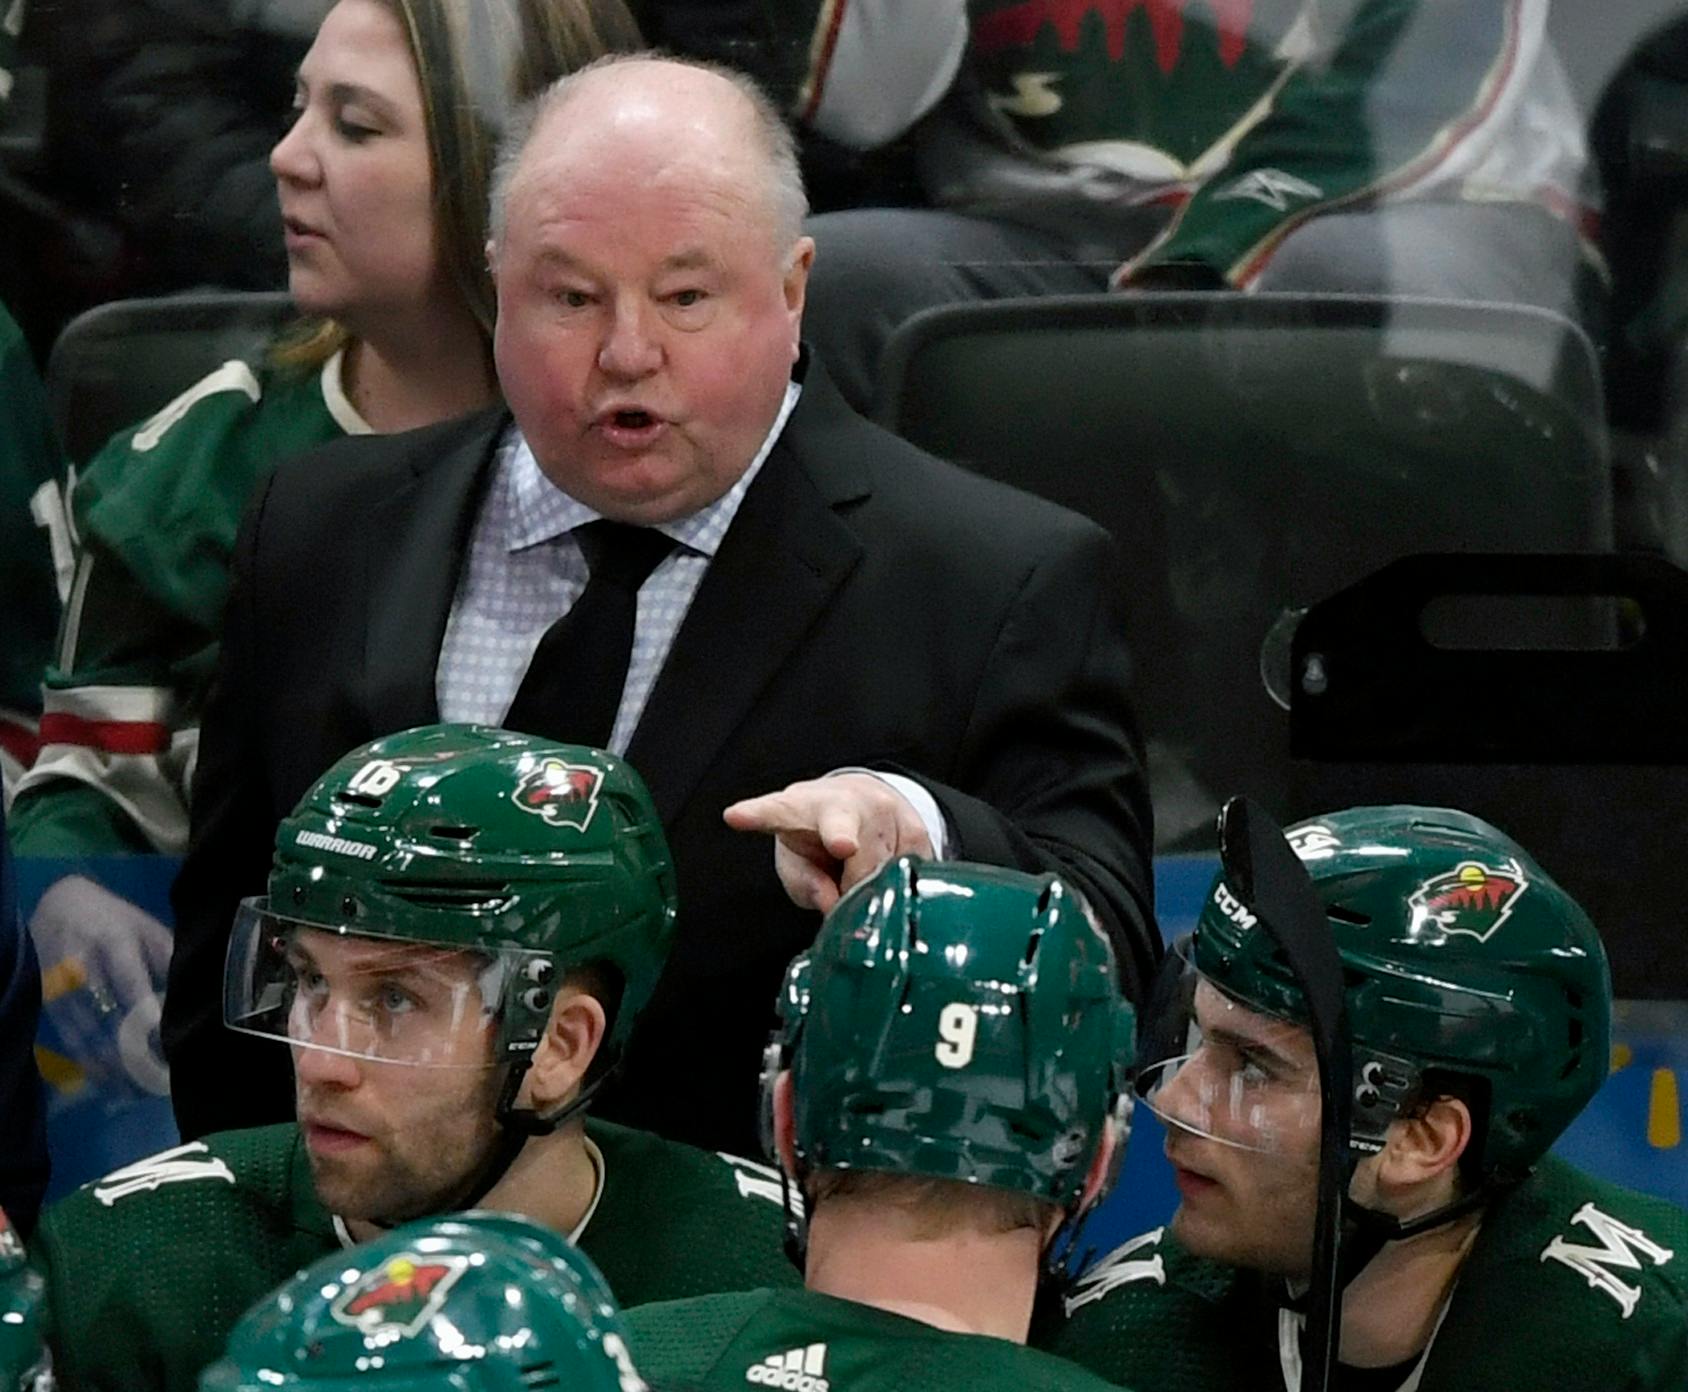 Coach Bruce Boudreau discusses the 3-2 loss to the Penguins.